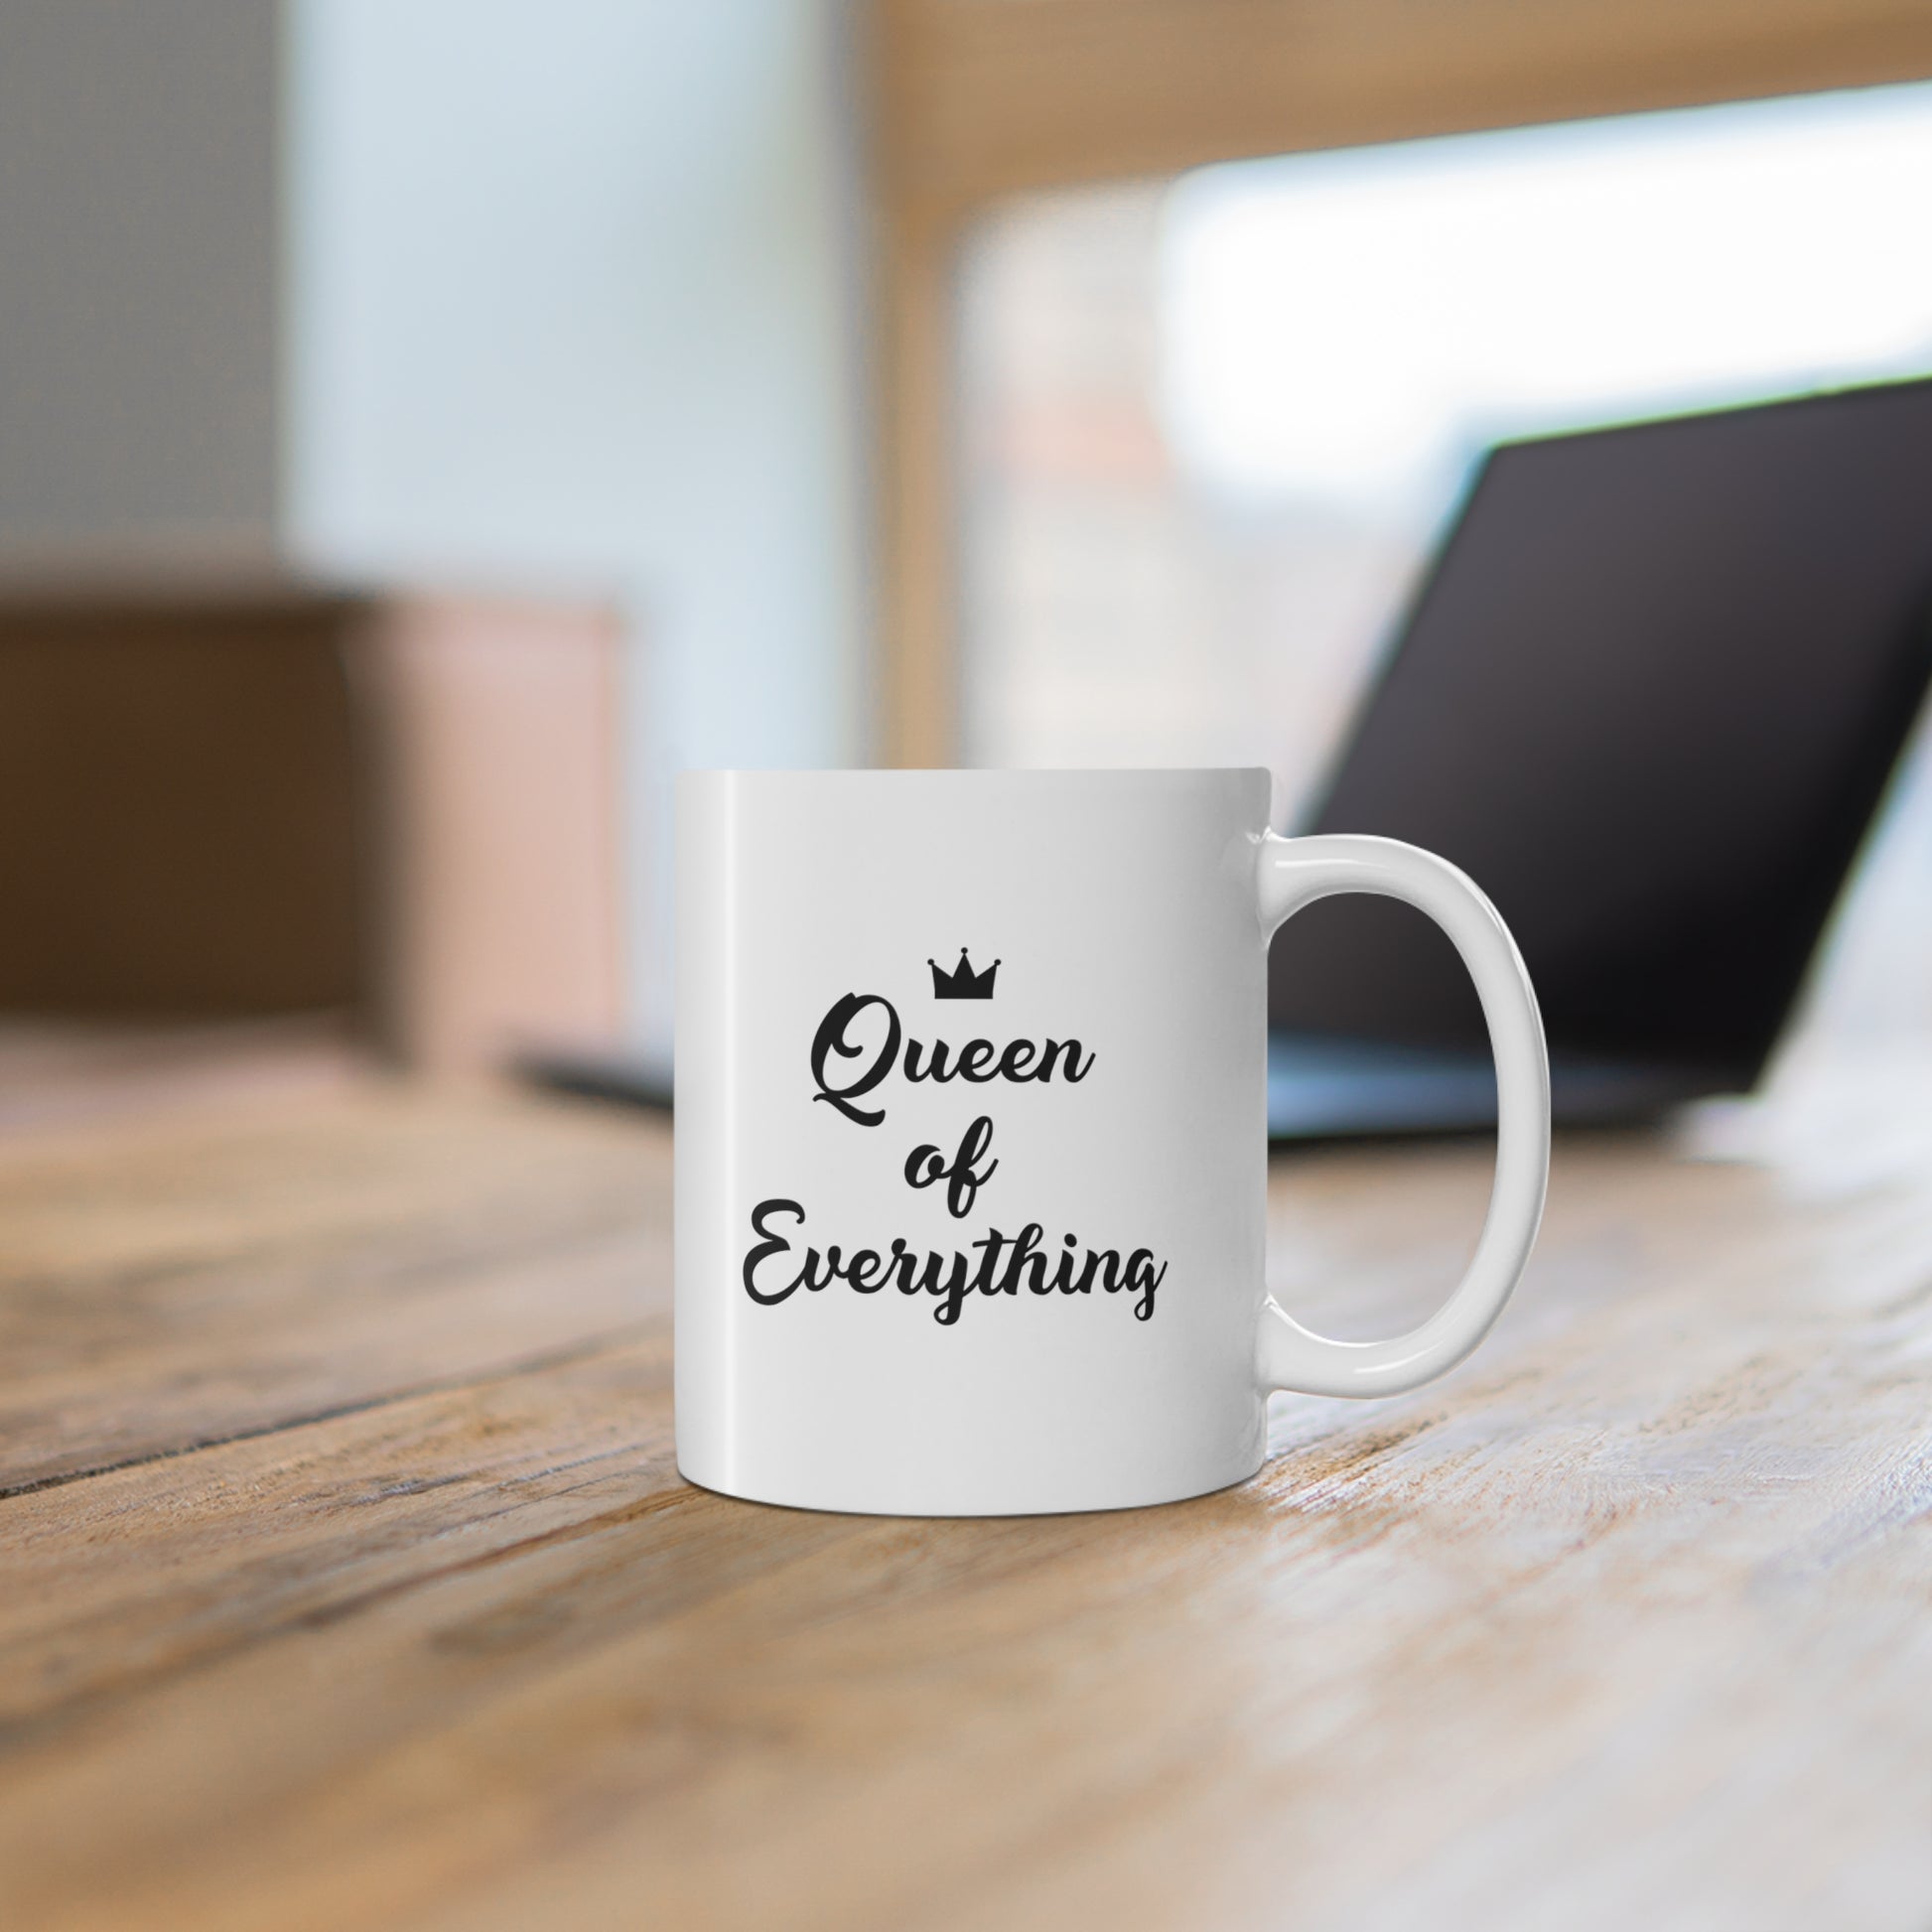 11oz ceramic mug with quote Queen of Everything 